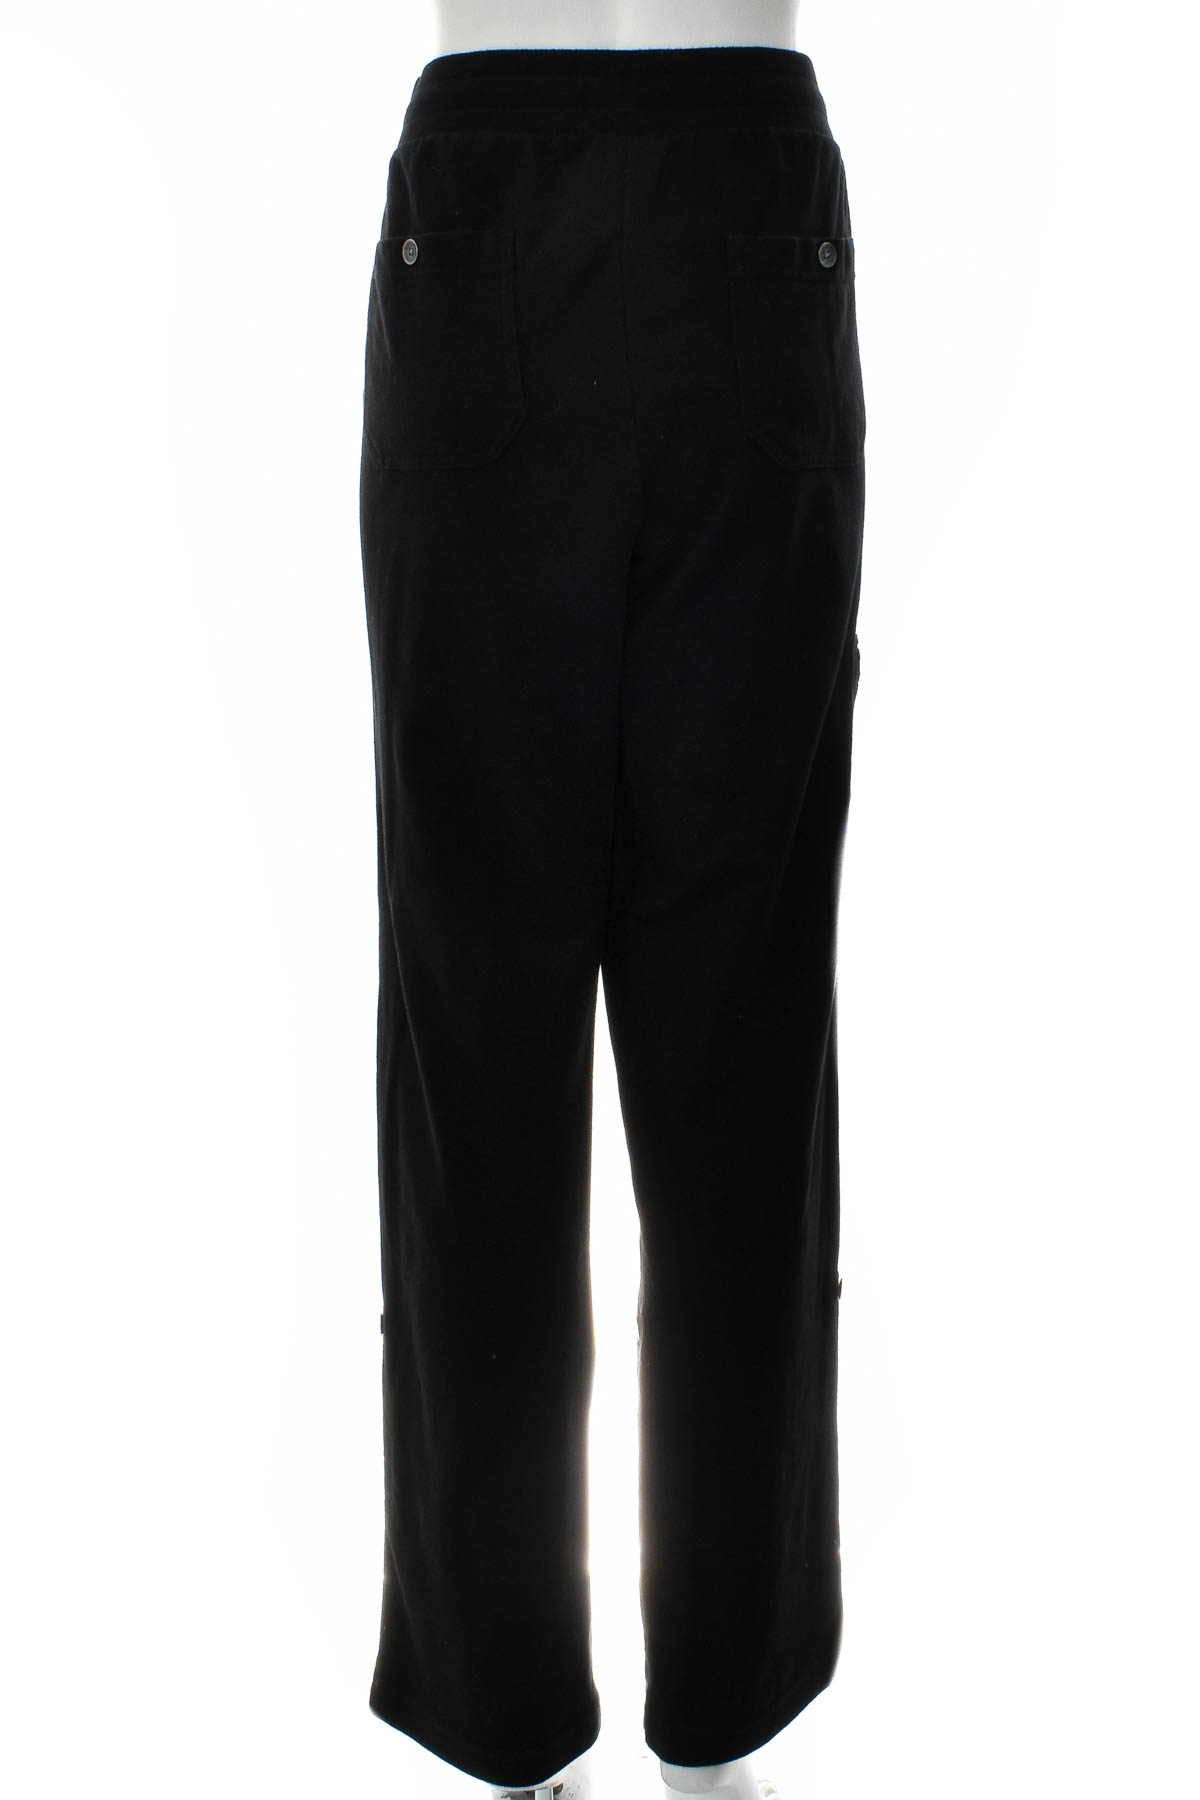 Women's trousers - SONOMA LIFE + STYLE - 1